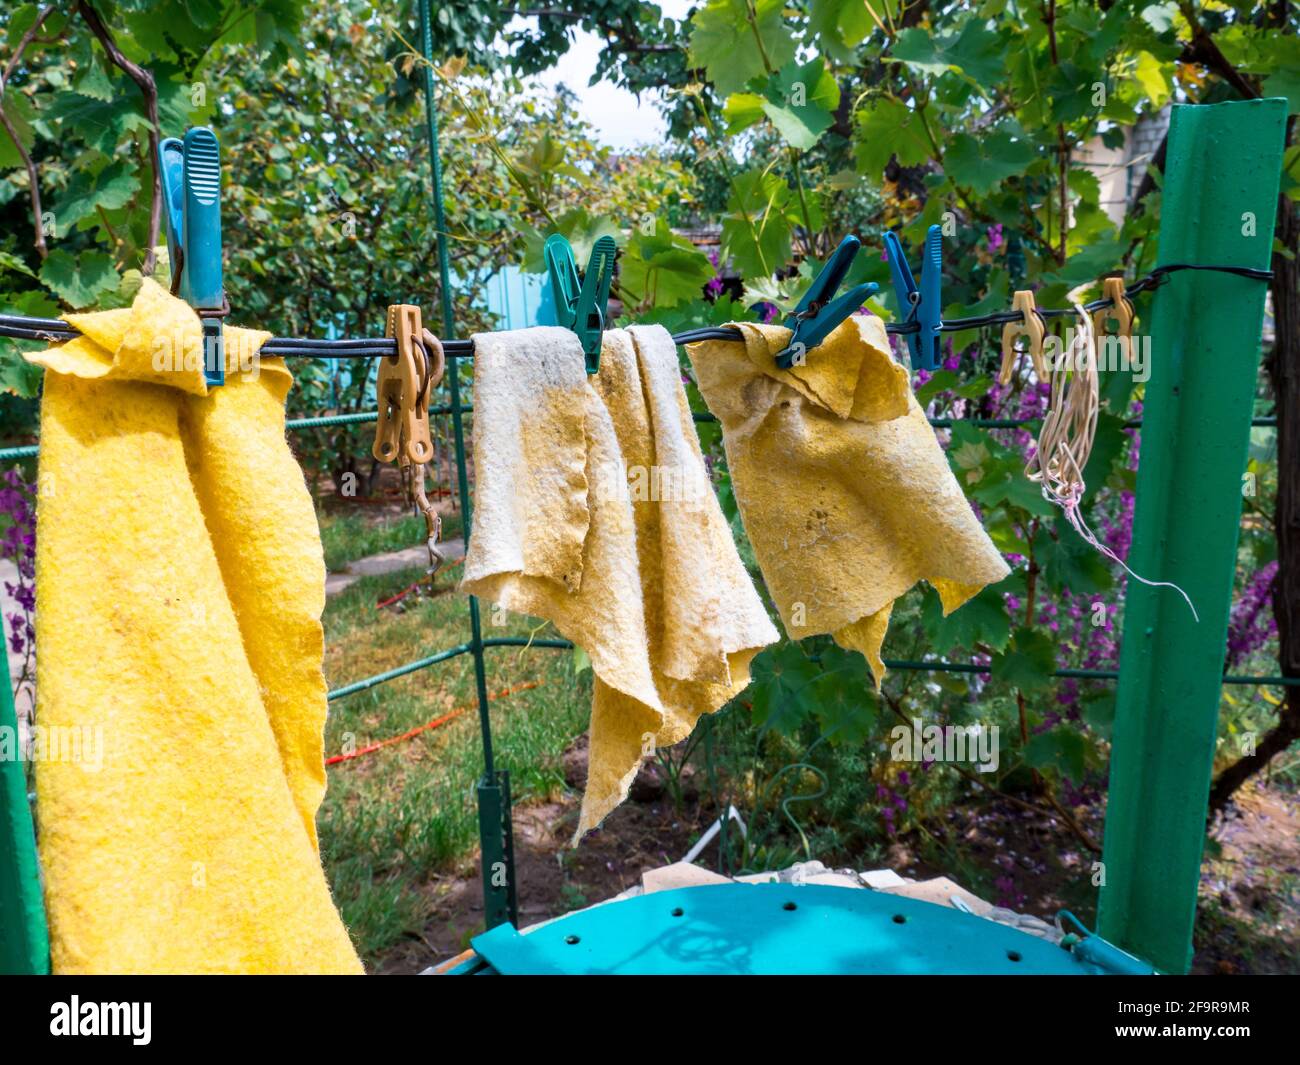 Yellow wet cleaning rags drying while hanging on a wire fixed with clothes pins at the yard outdoors. Rural background, simple life home concept. Stock Photo